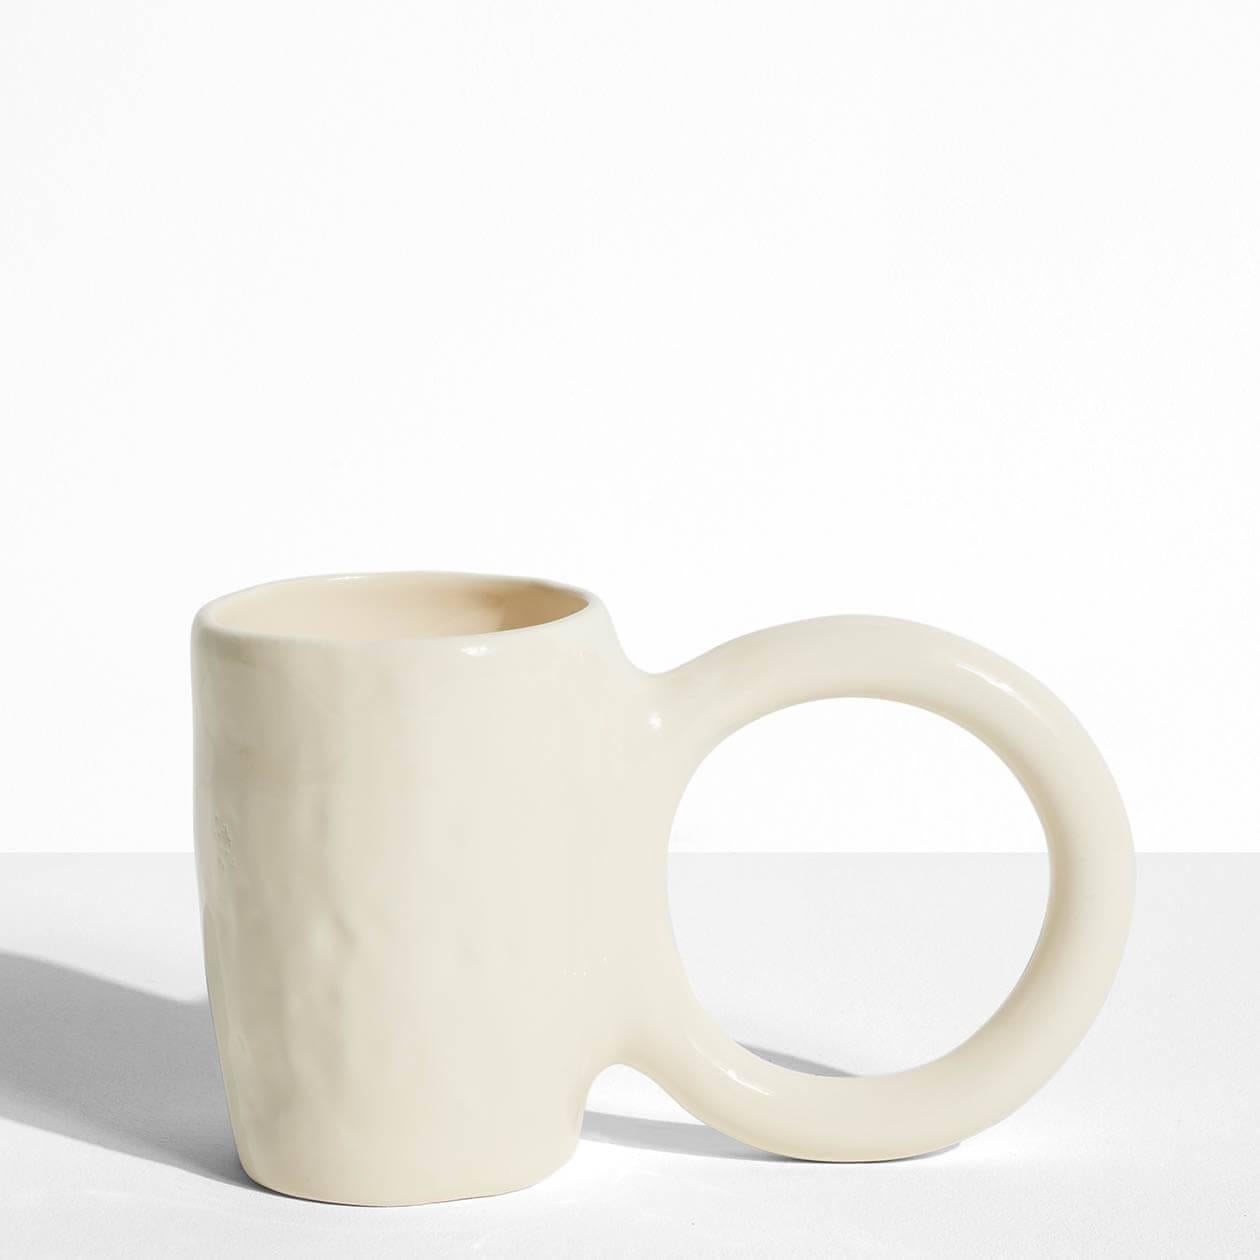 The Donut collection draws its inspiration from the world of baking. Designer Pia Chevalier arouses our senses with this collection of appetising cups and mugs. The pieces’ oversized handle imitates the shape of a doughnut and the enamelling echoes